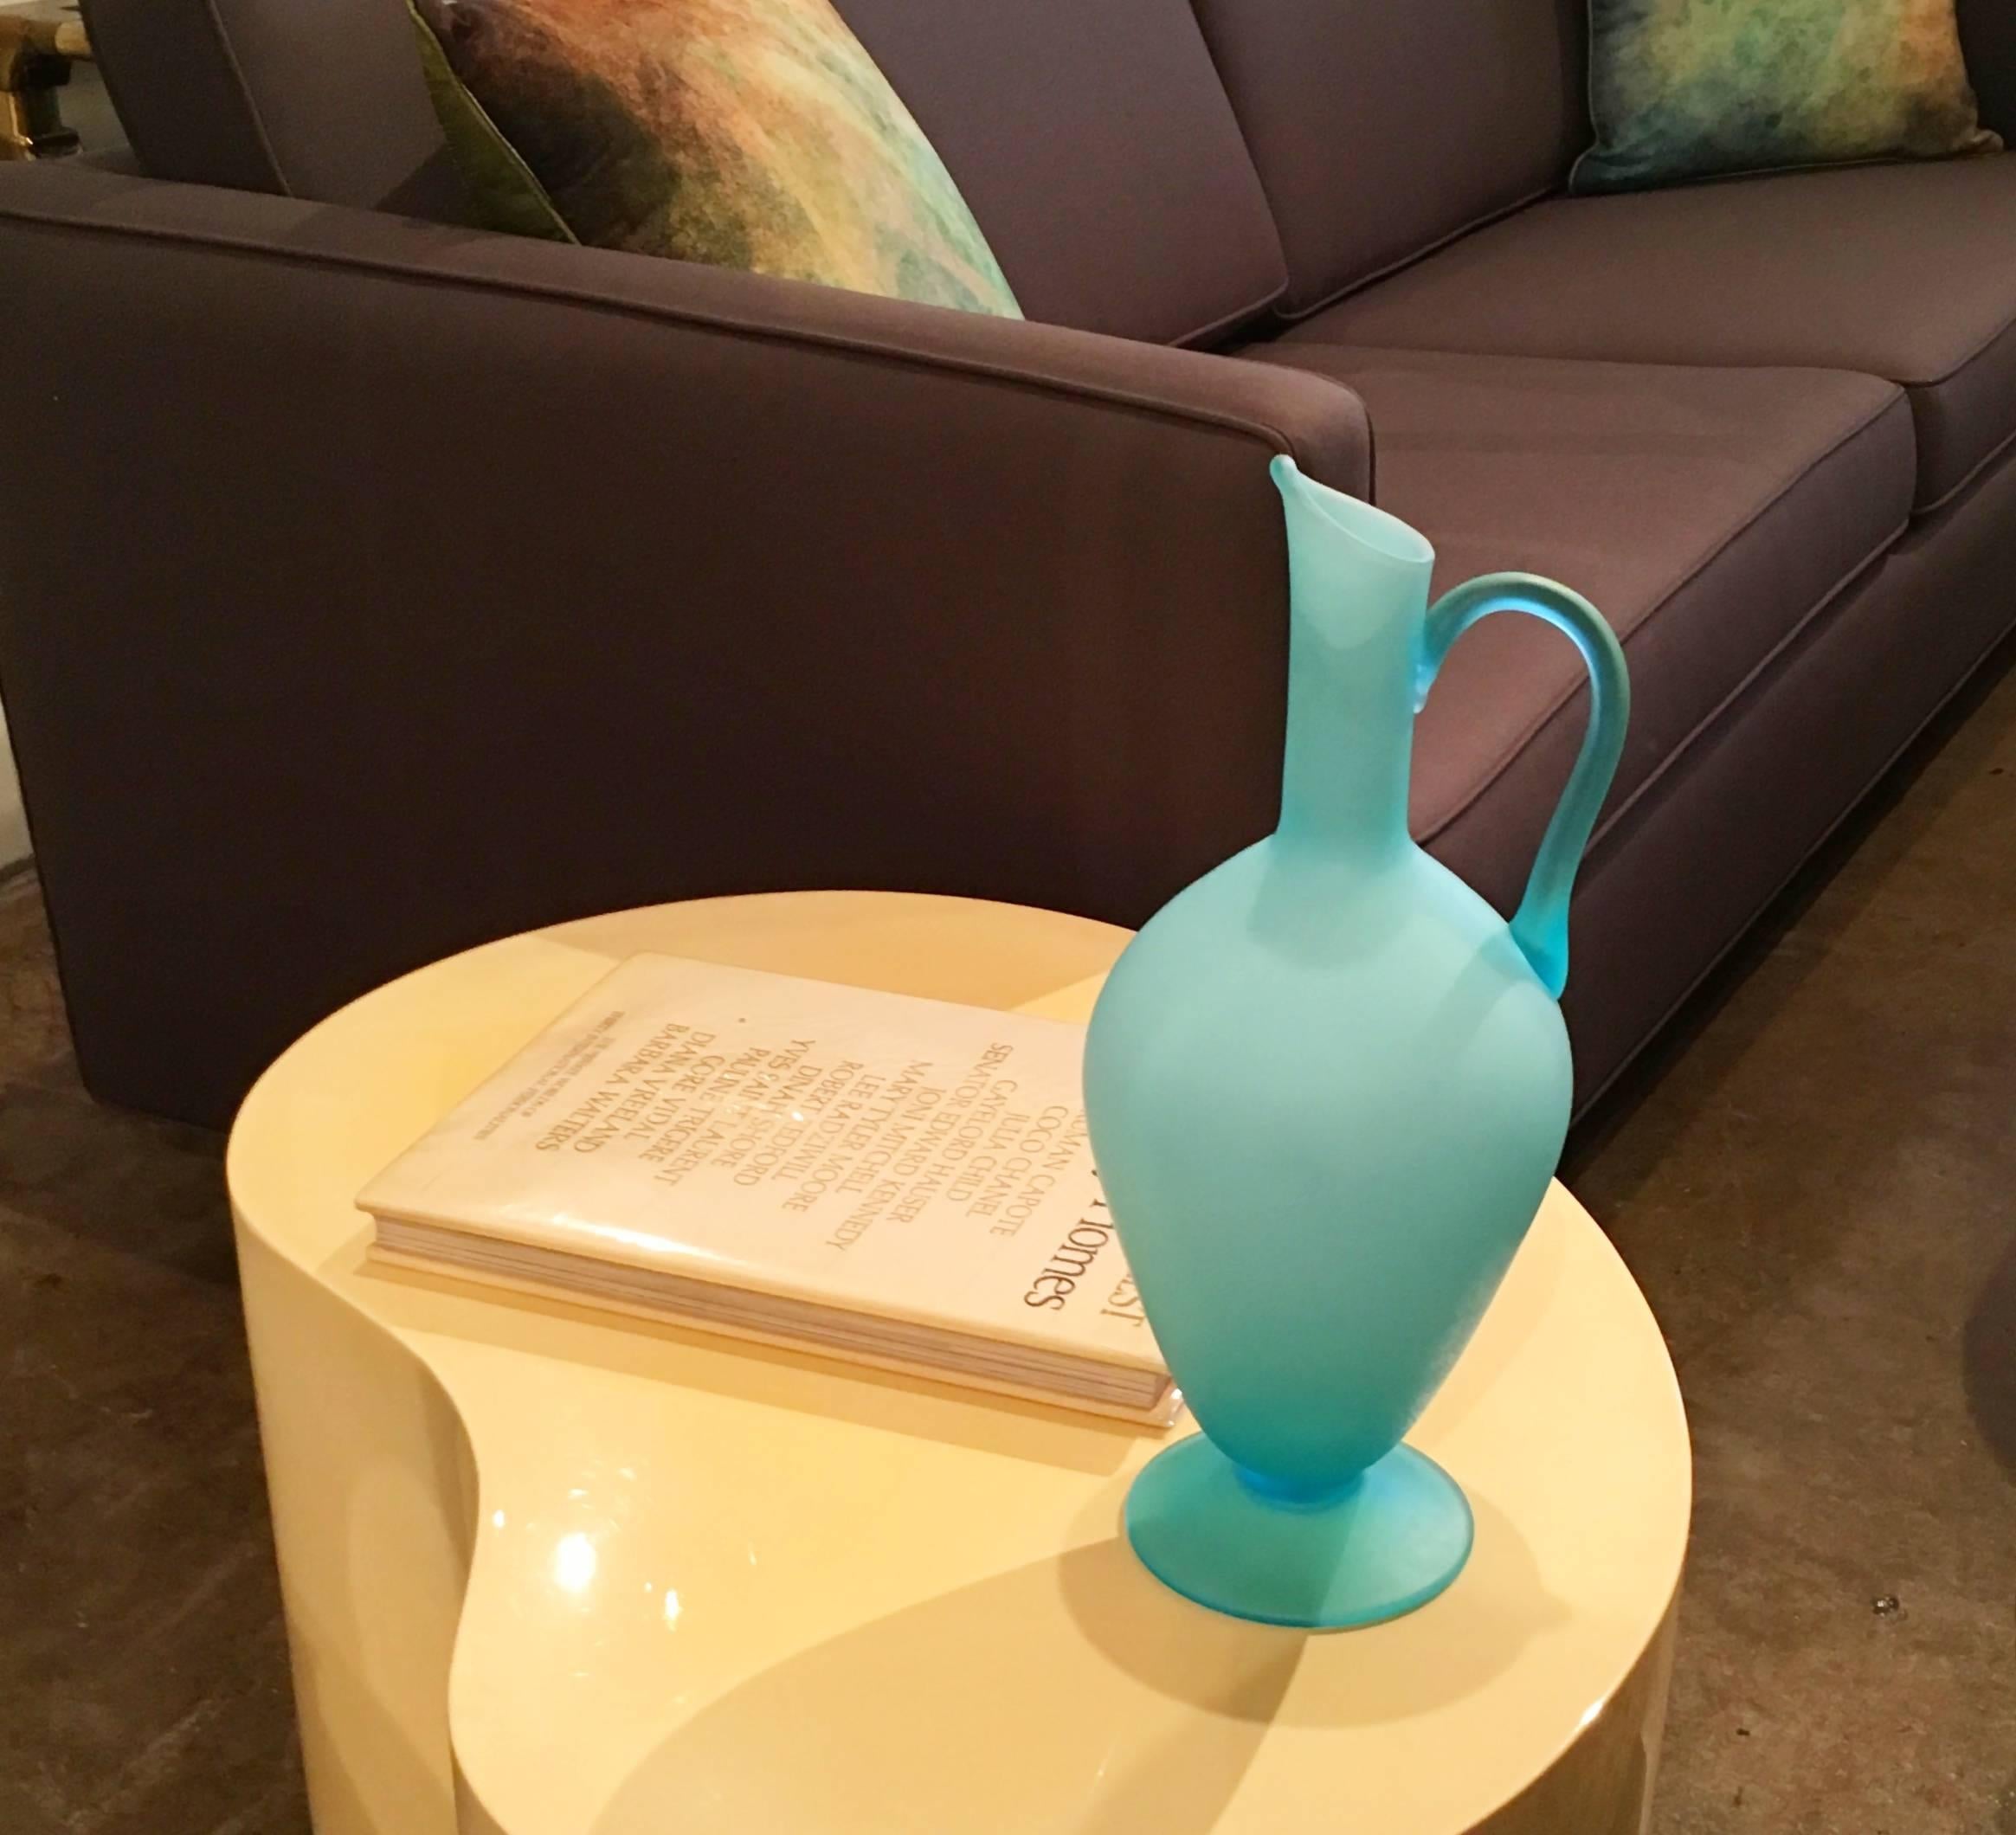 Offered is a sandblasted glass urn / pitcher in robin's egg blue.   The blue is stunning and would look beautiful with almost any decor.